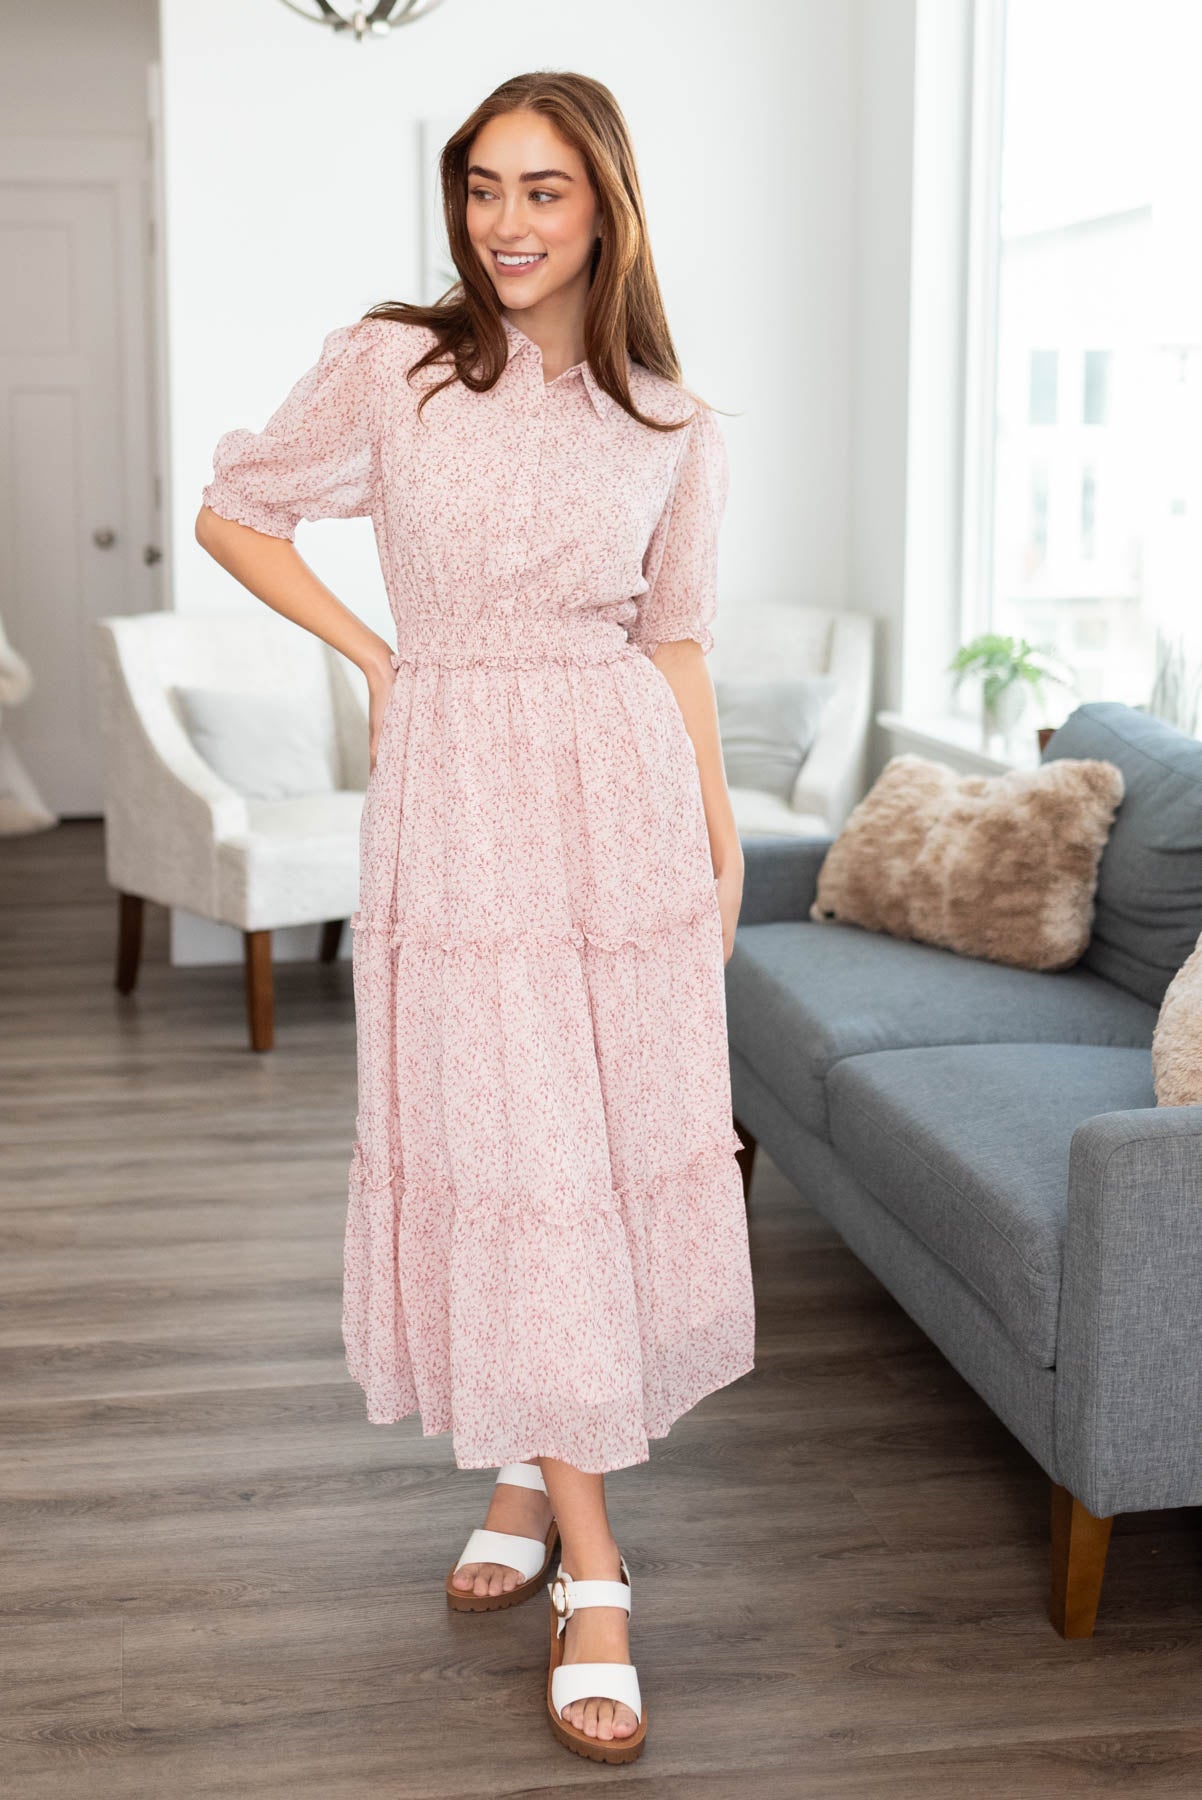 Dusty blush collared dress with an elastic waist